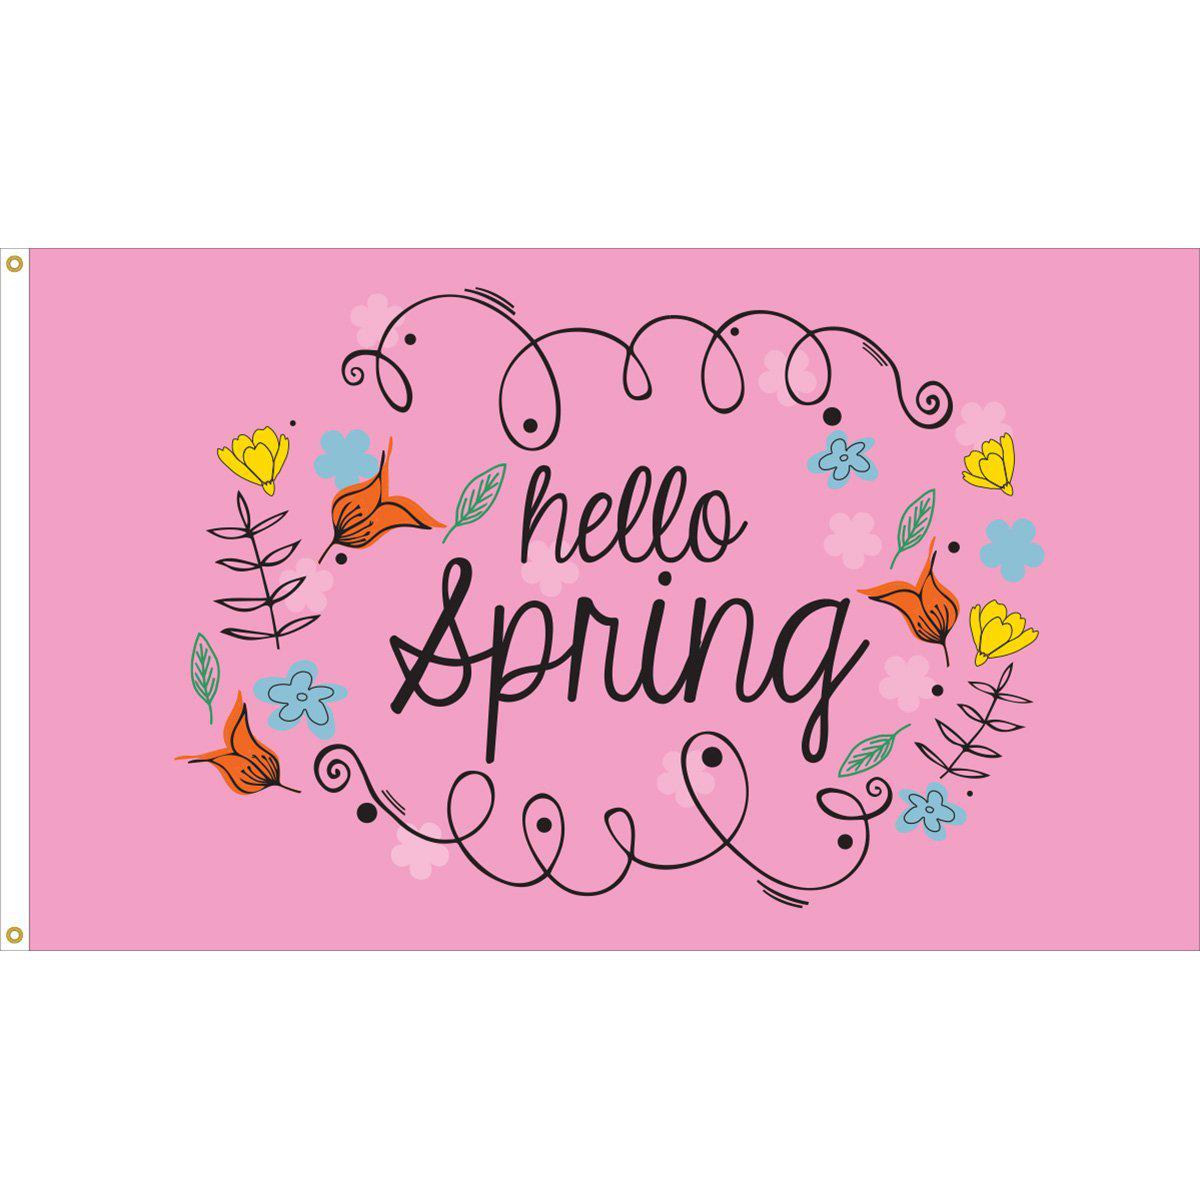 Our Hello Spring 3' x 5' Flag features whimsical flowers and "Hello Spring" message on a pink background. 